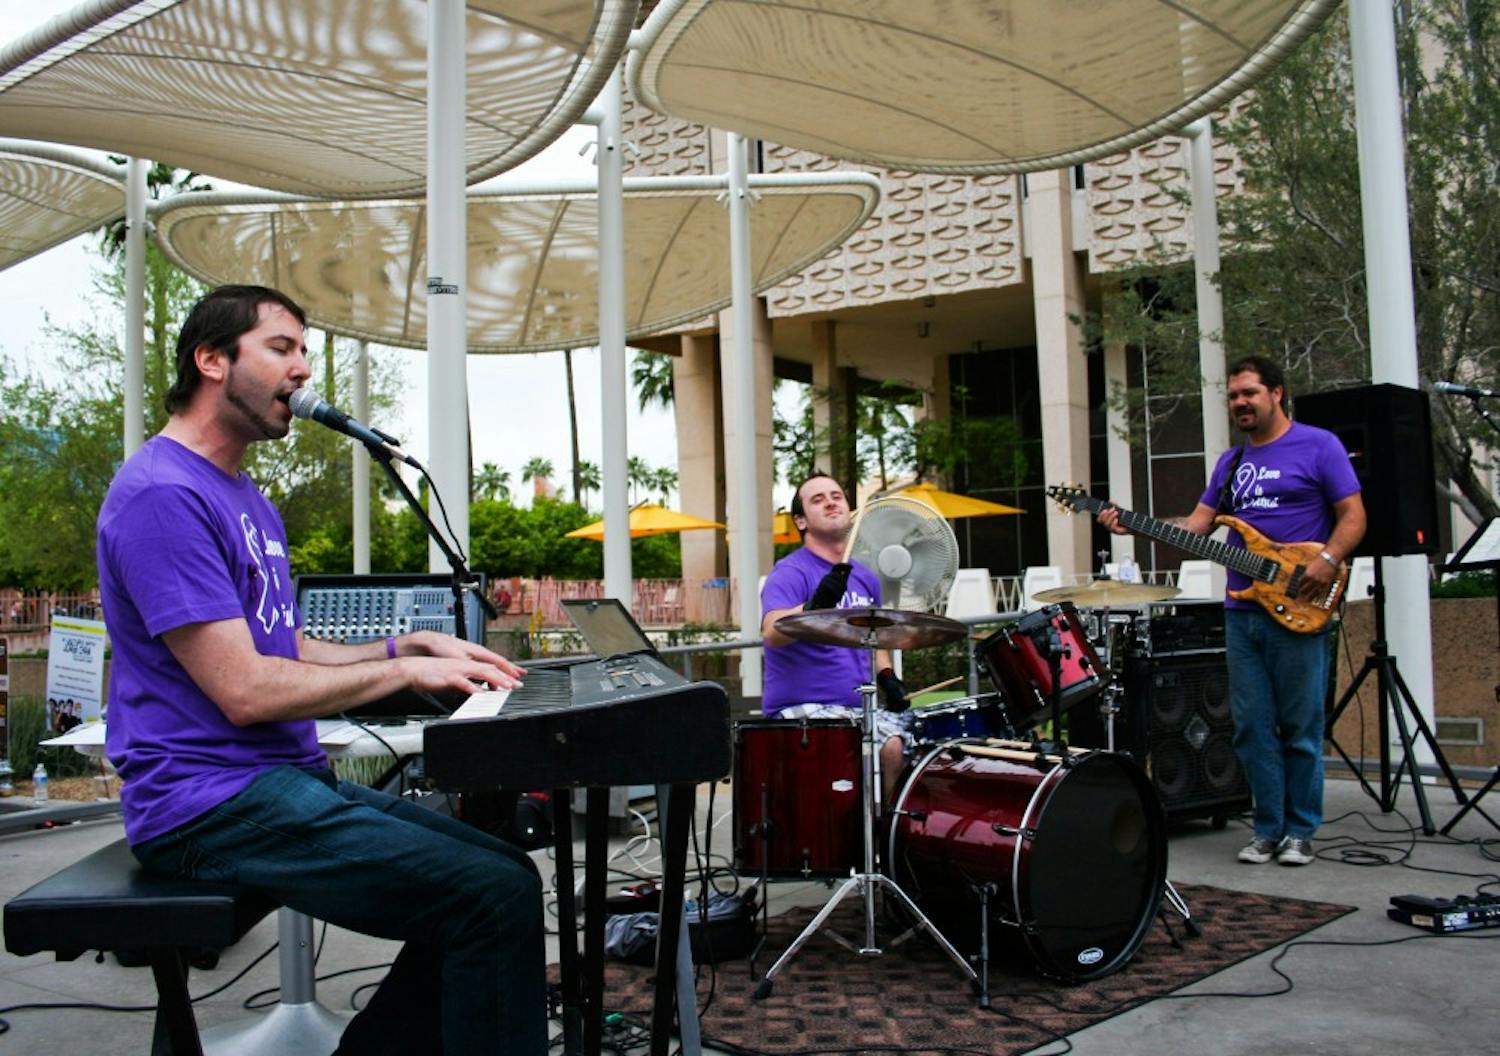 ROCKING AGAINST ABUSE: The band The Final performs at the Go Purple Concert in front of the Memorial Union to raise awareness and fight against domestic violence. (Photo by Lisa Bartoli)